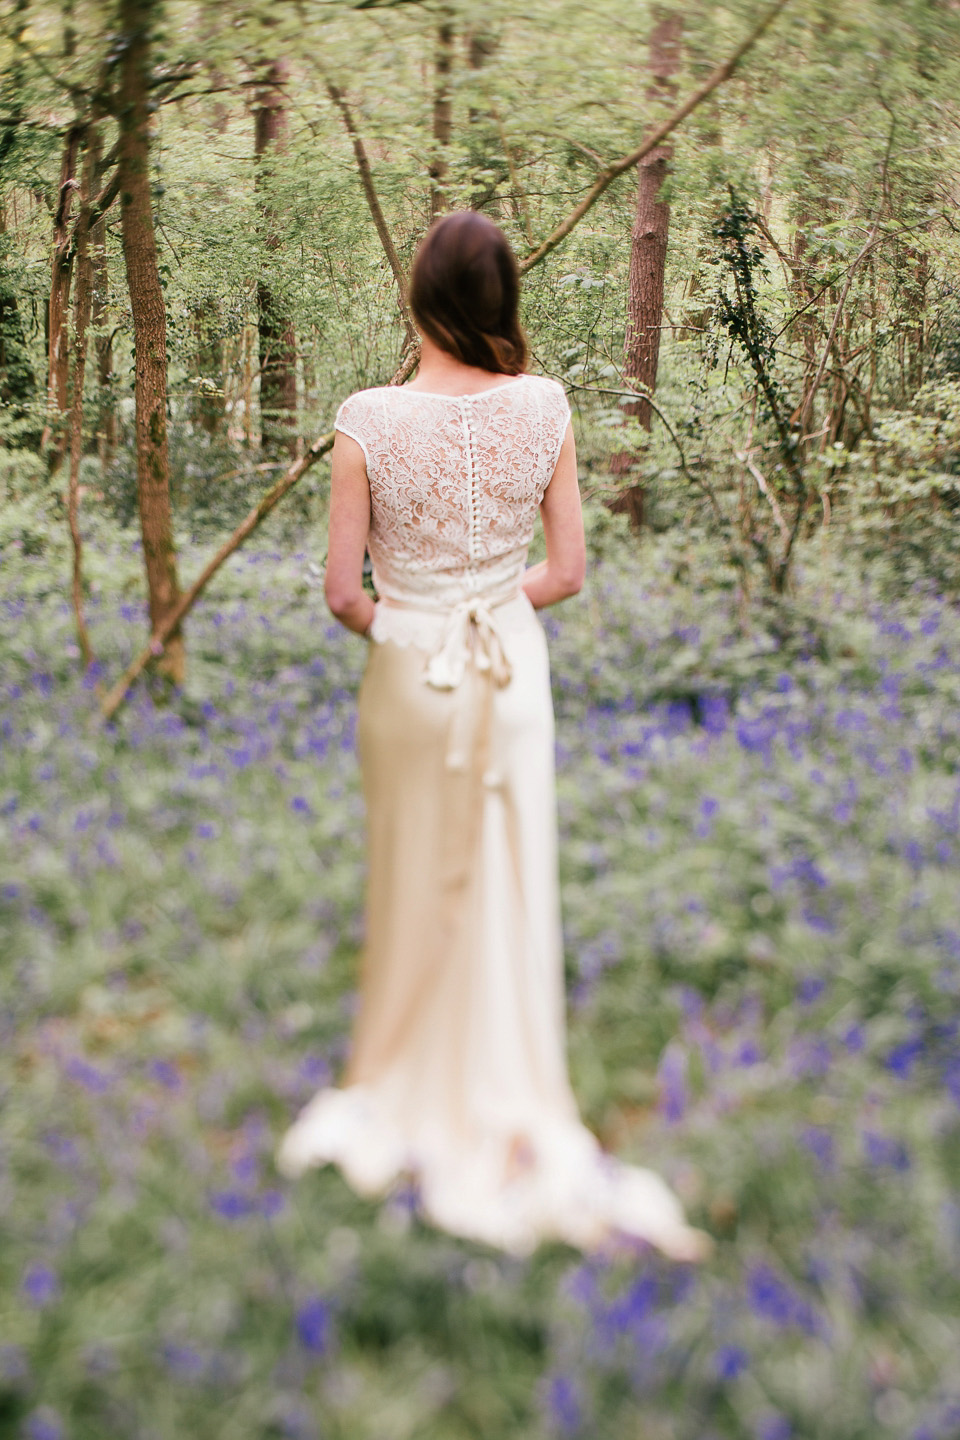 The bride wears a Sabina Motasem gown for her rustic, festival style wedding with glamping near the forrest. Photography by Joanna Nicole.